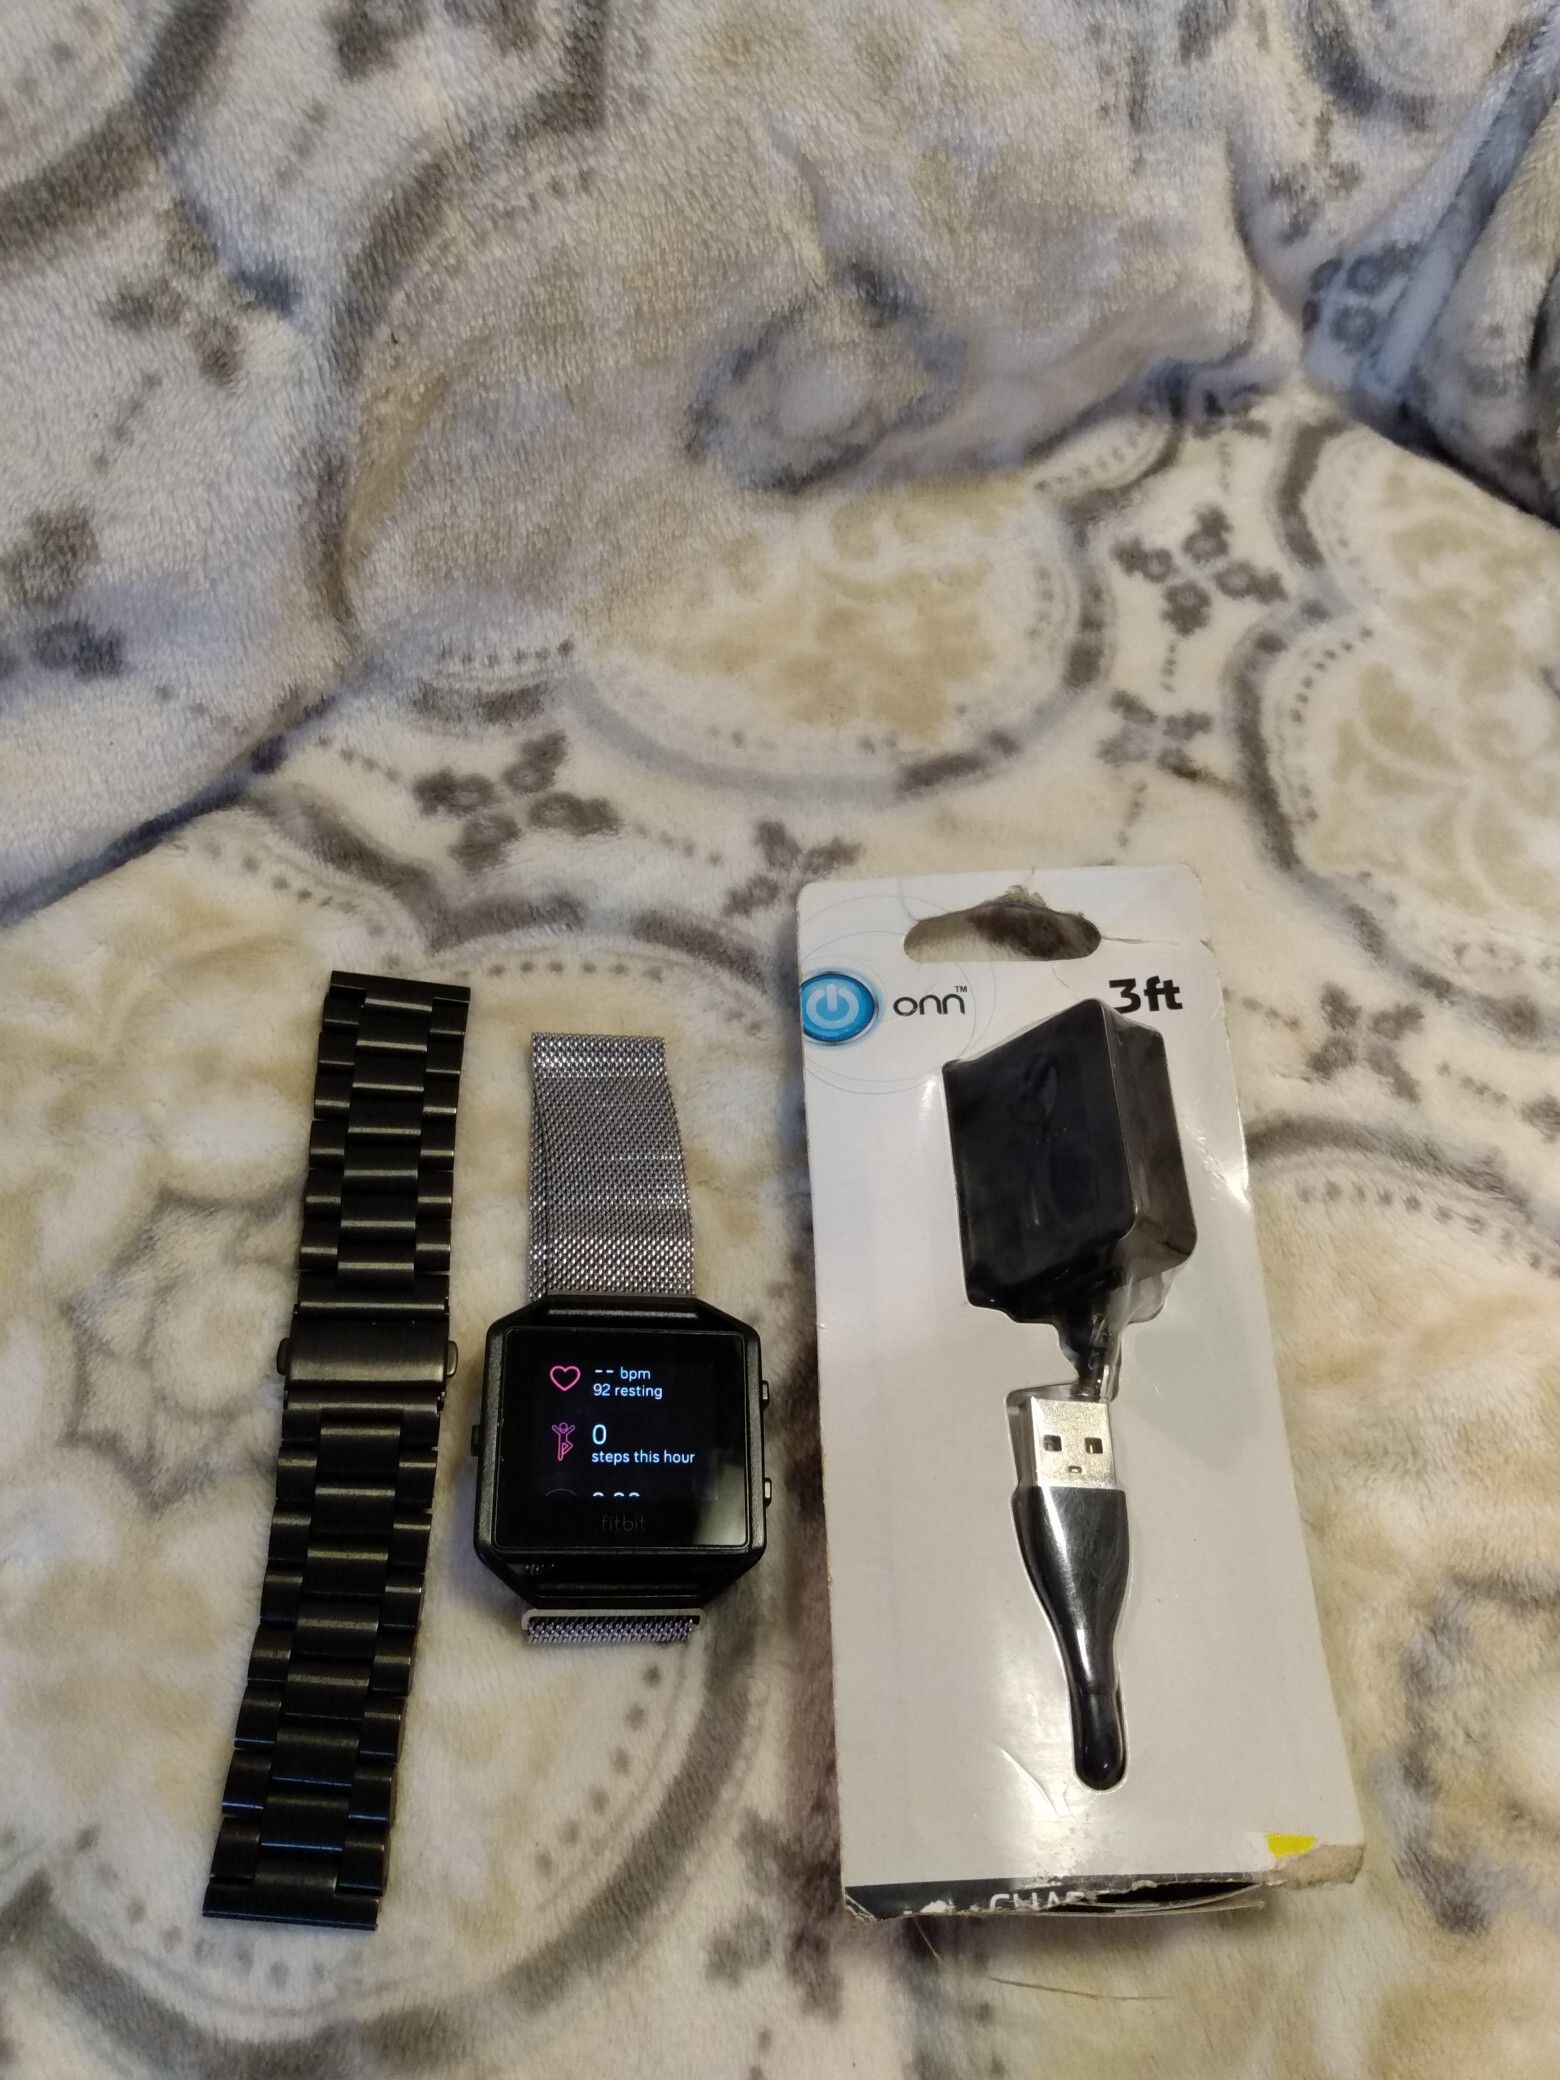 Fitbit lot!!! Fitbit versa2 special edition. As well as the Fitbit blaze.